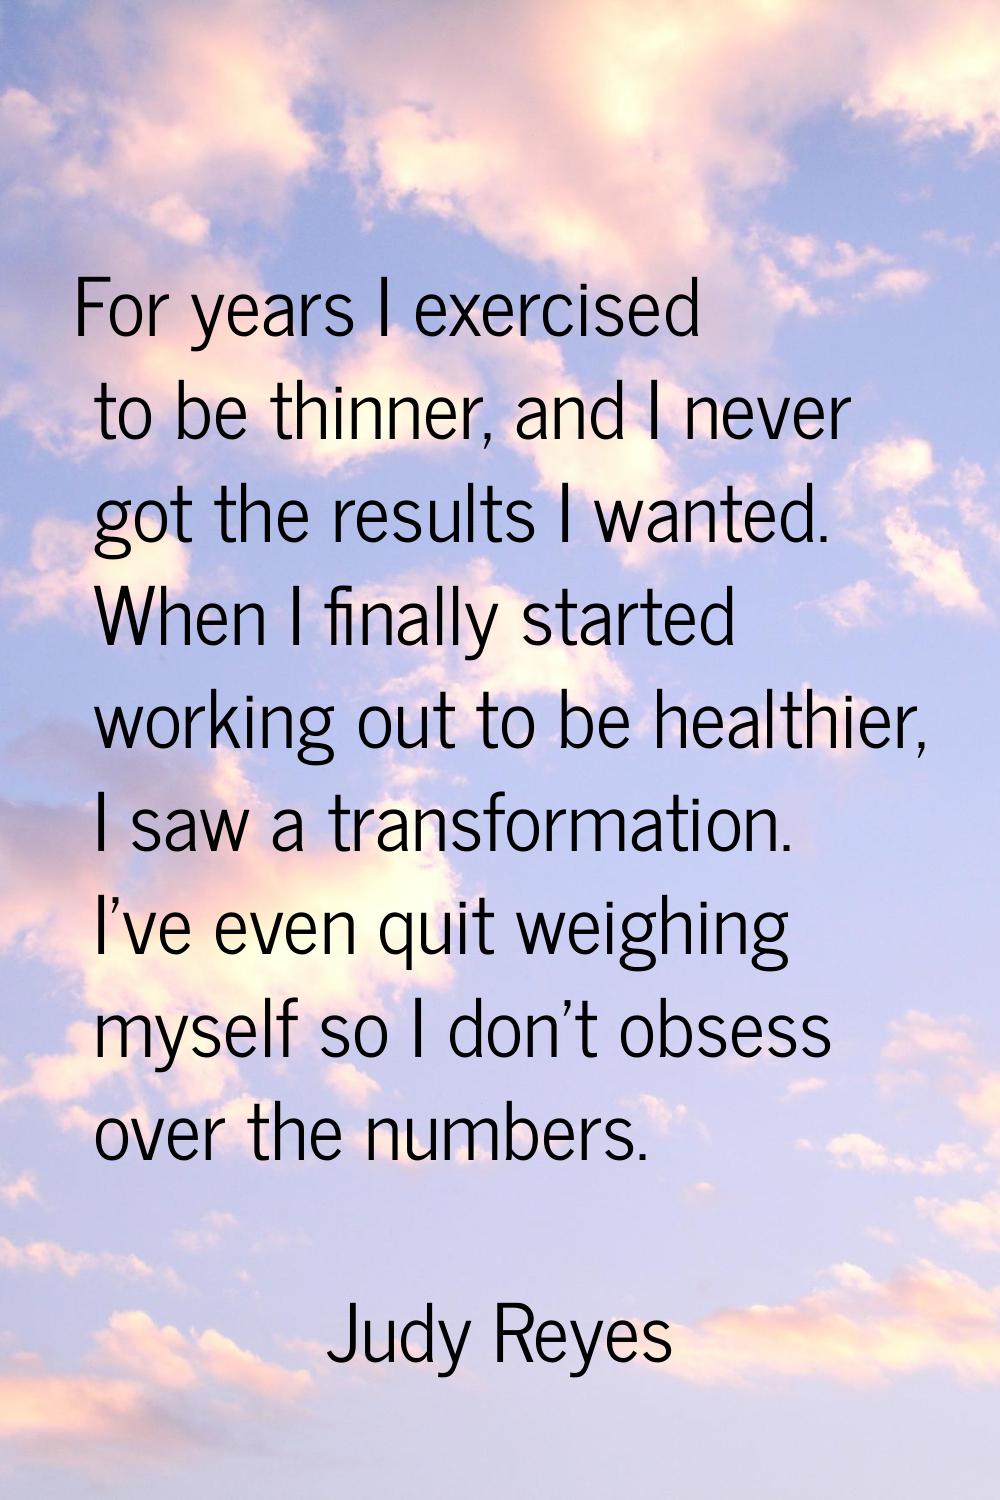 For years I exercised to be thinner, and I never got the results I wanted. When I finally started w